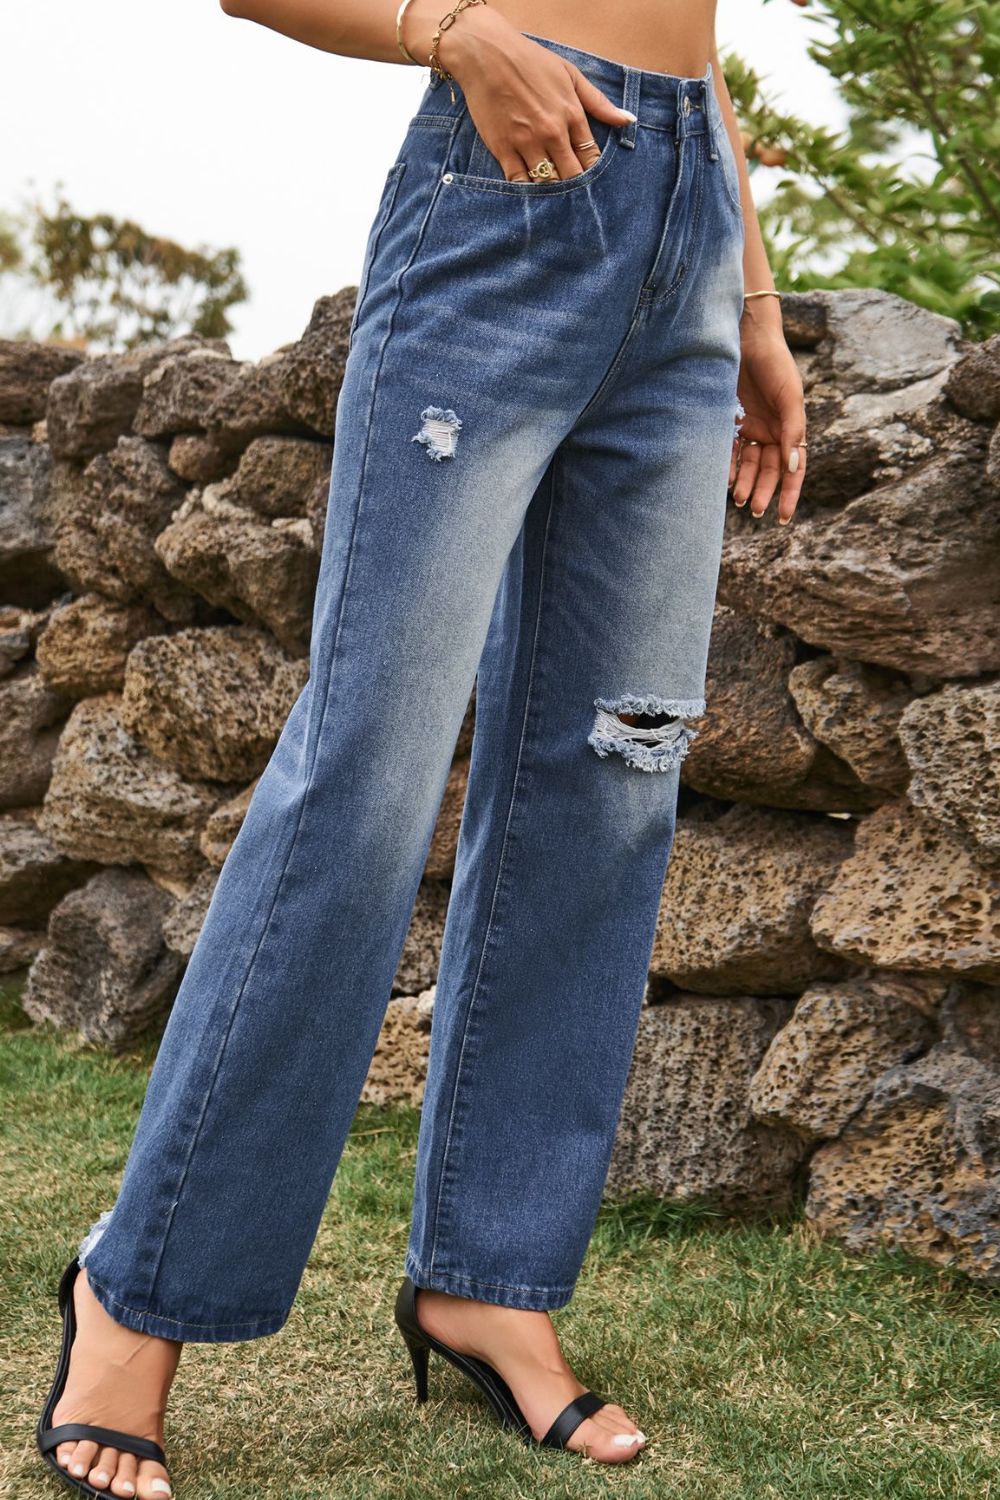 Distressed Buttoned Loose Fit Jeans - bertofonsi